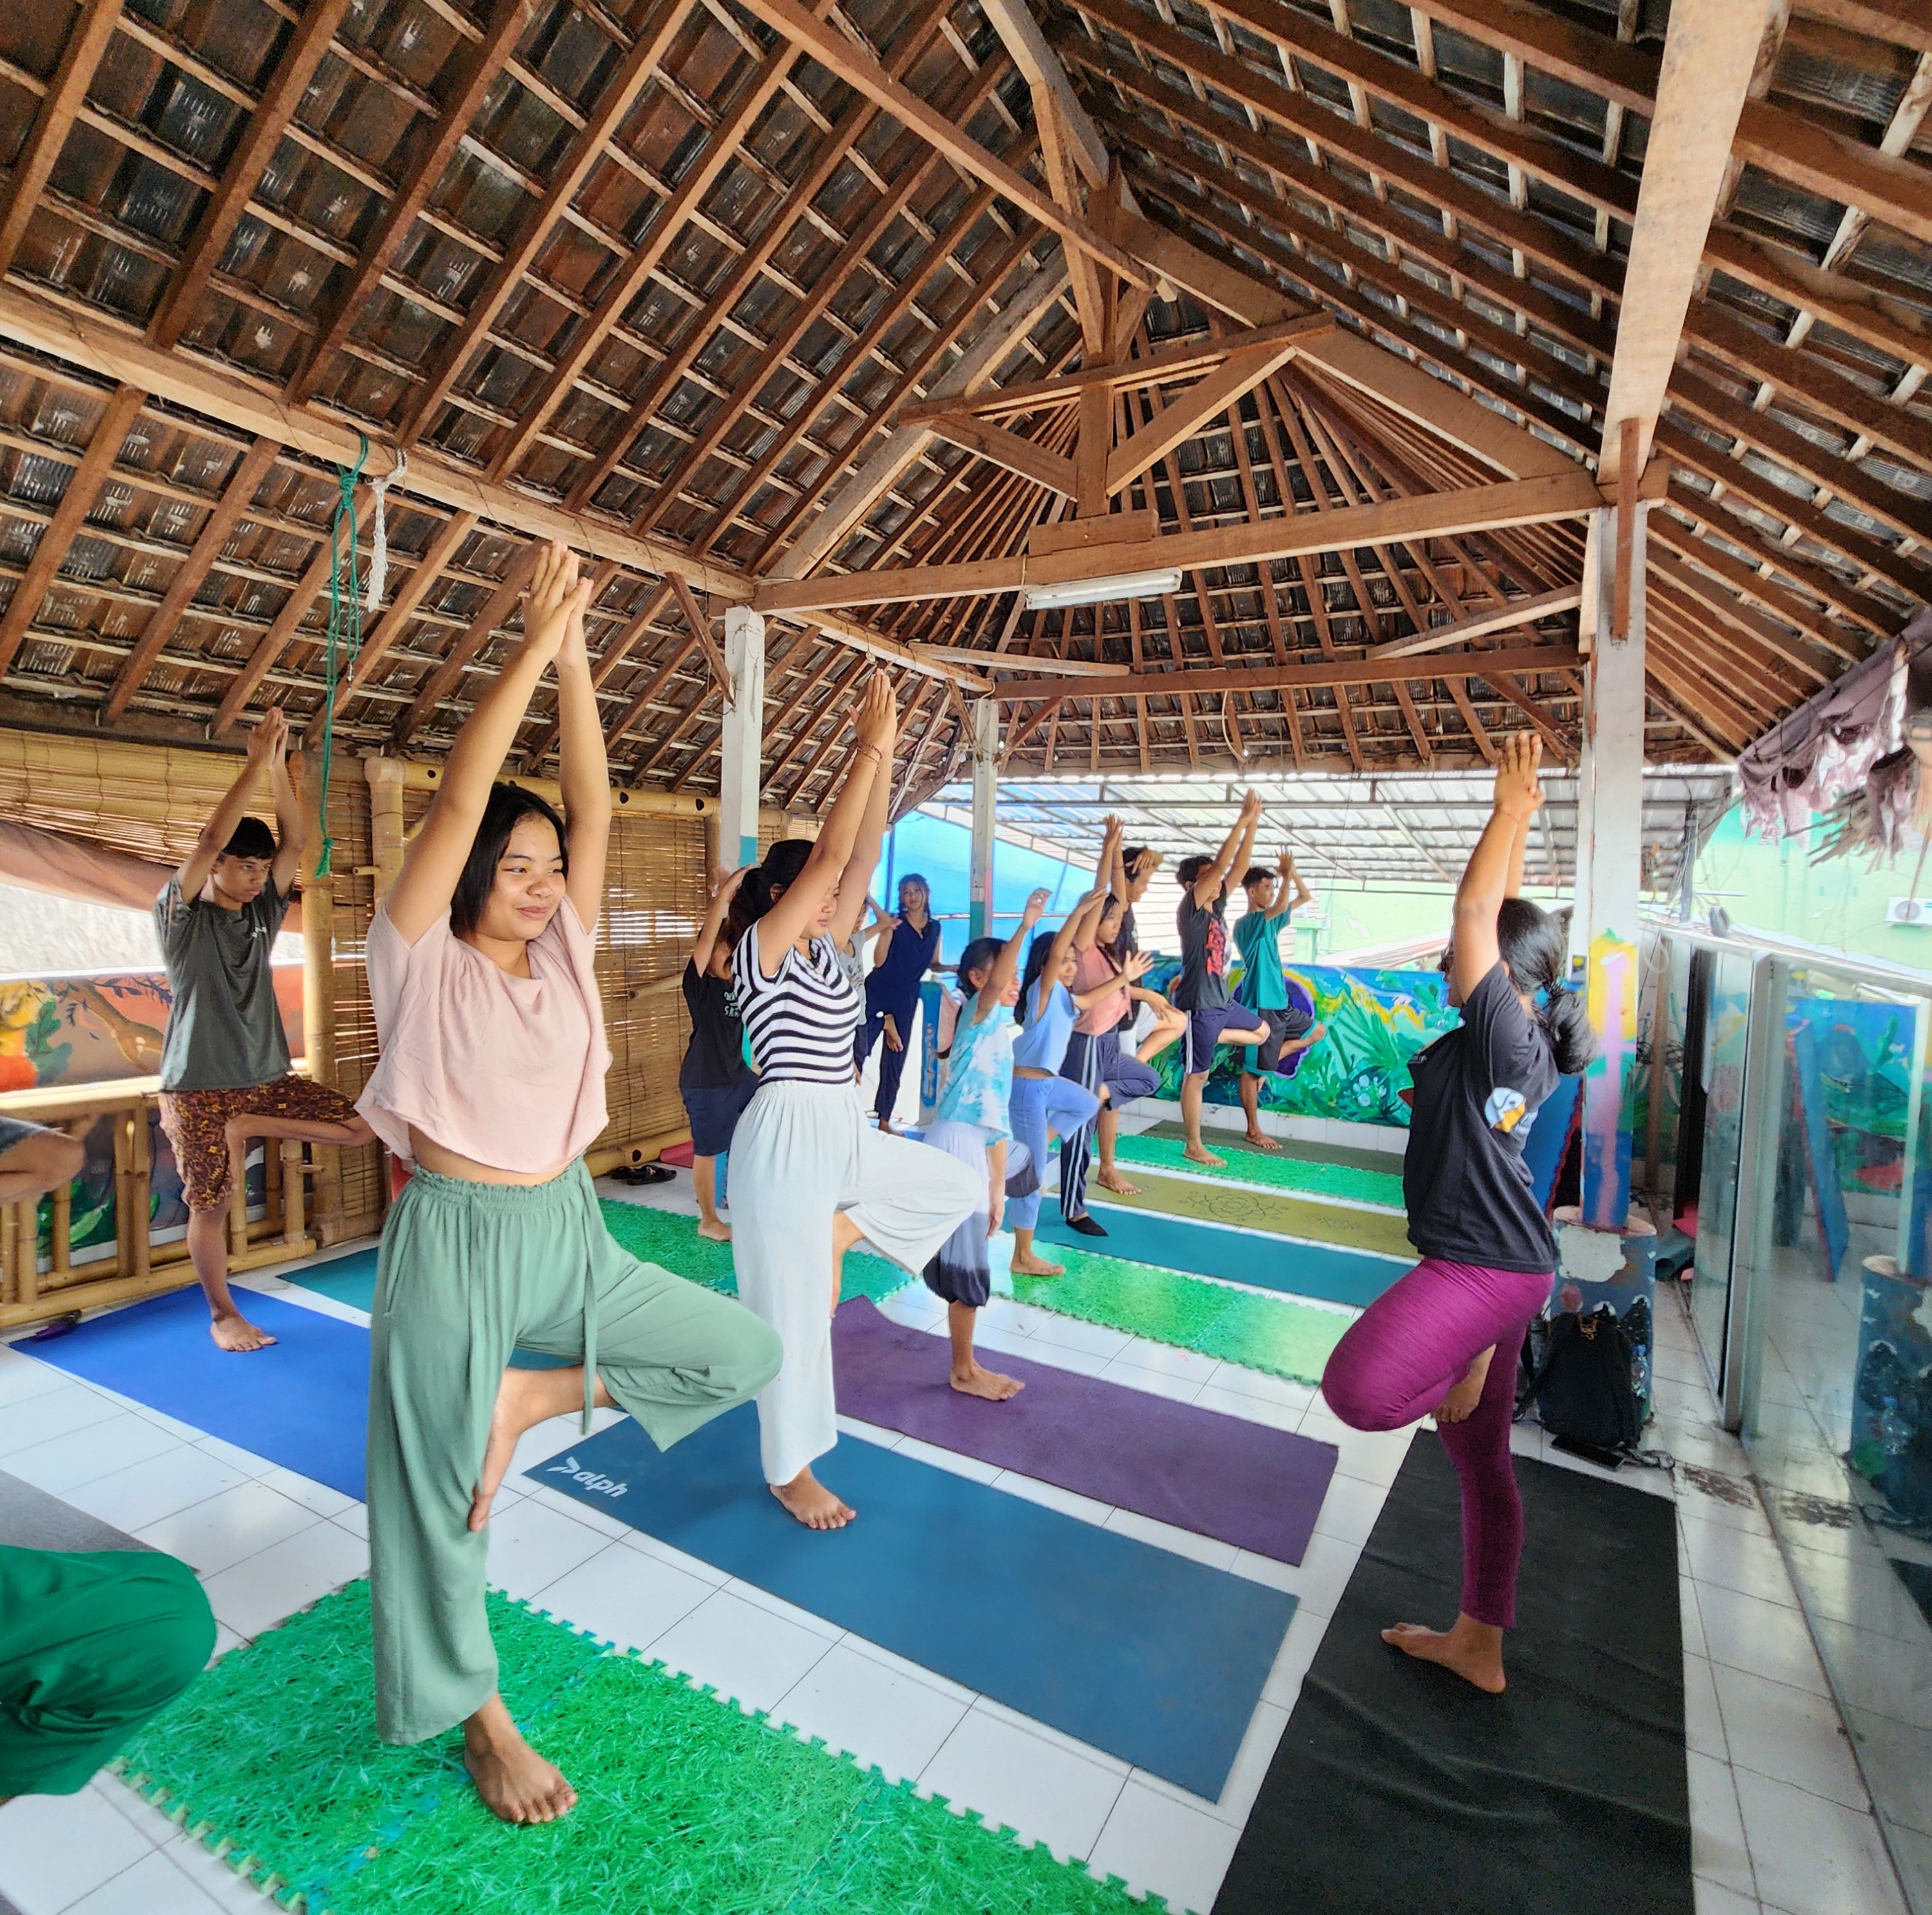 people meditating on their yoga mats in a open place